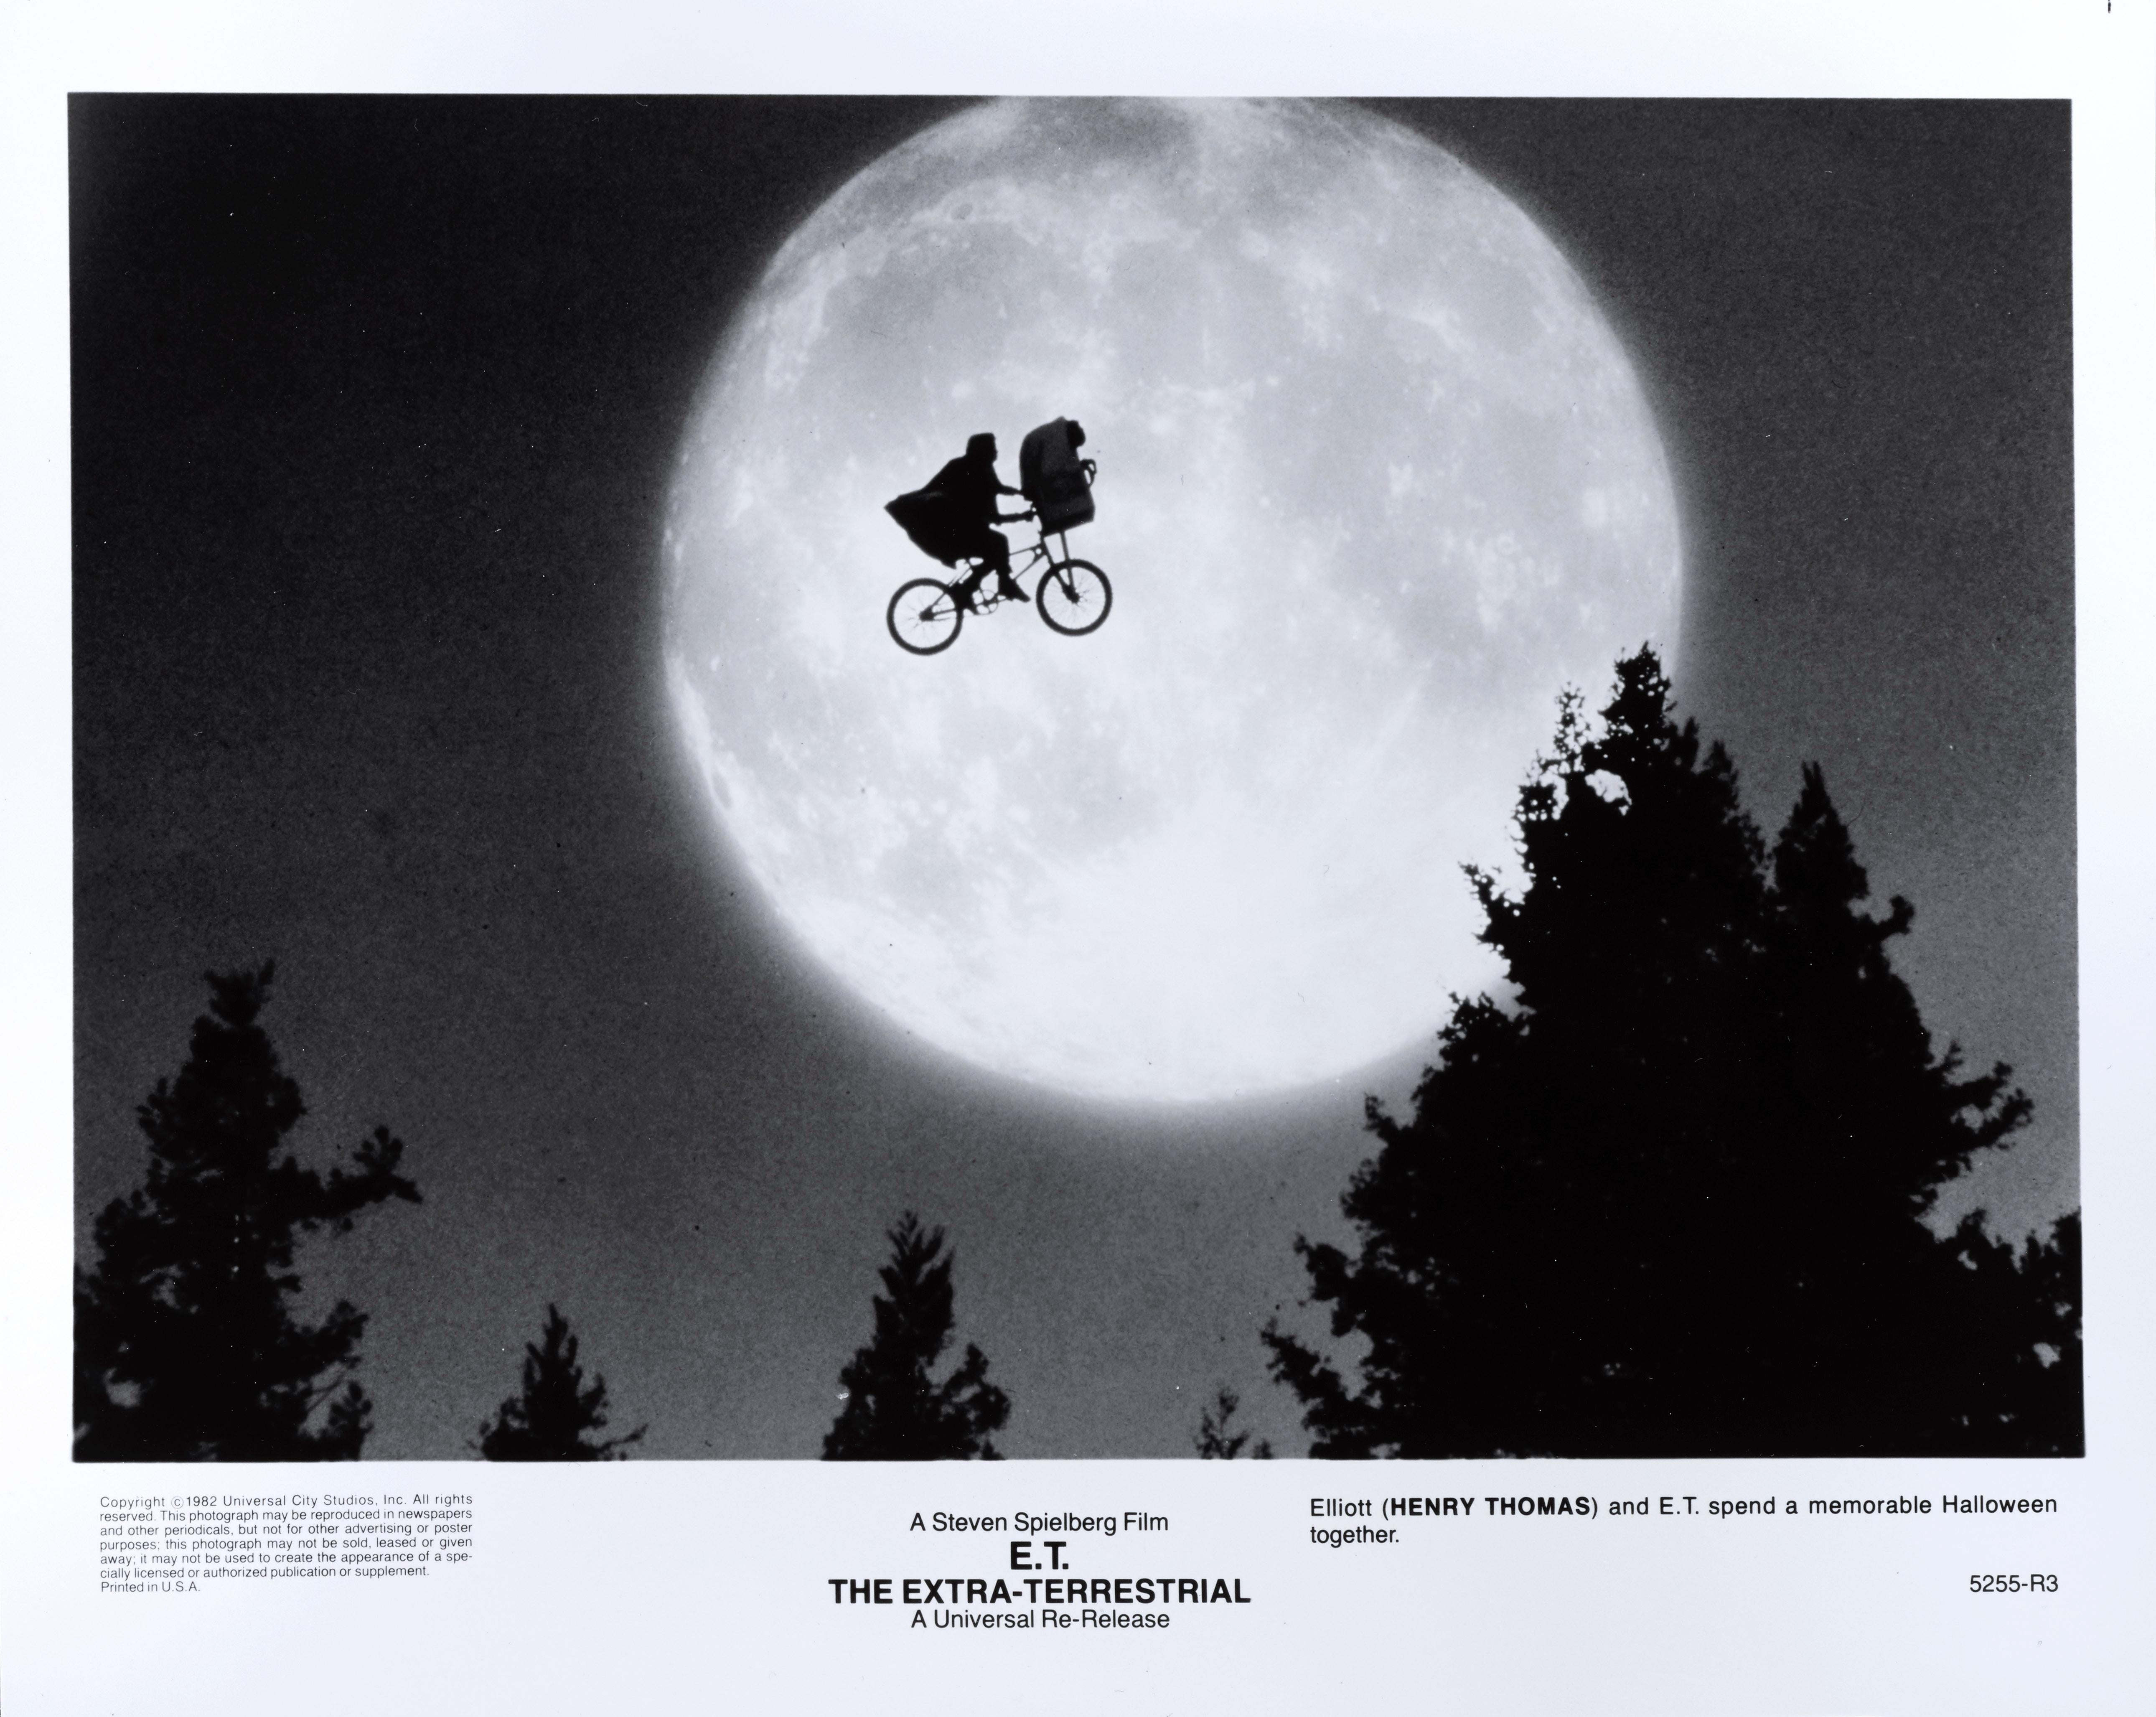 Original production still for the 1982 film E.T. The Extra Terrestrial.
The film was directed by Steven Spielberg and starred Dee Wallace, Drew Barrymore, Peter Coyote.  This piece is conservation framed with UV plexiglass and acid-free mounts.  The